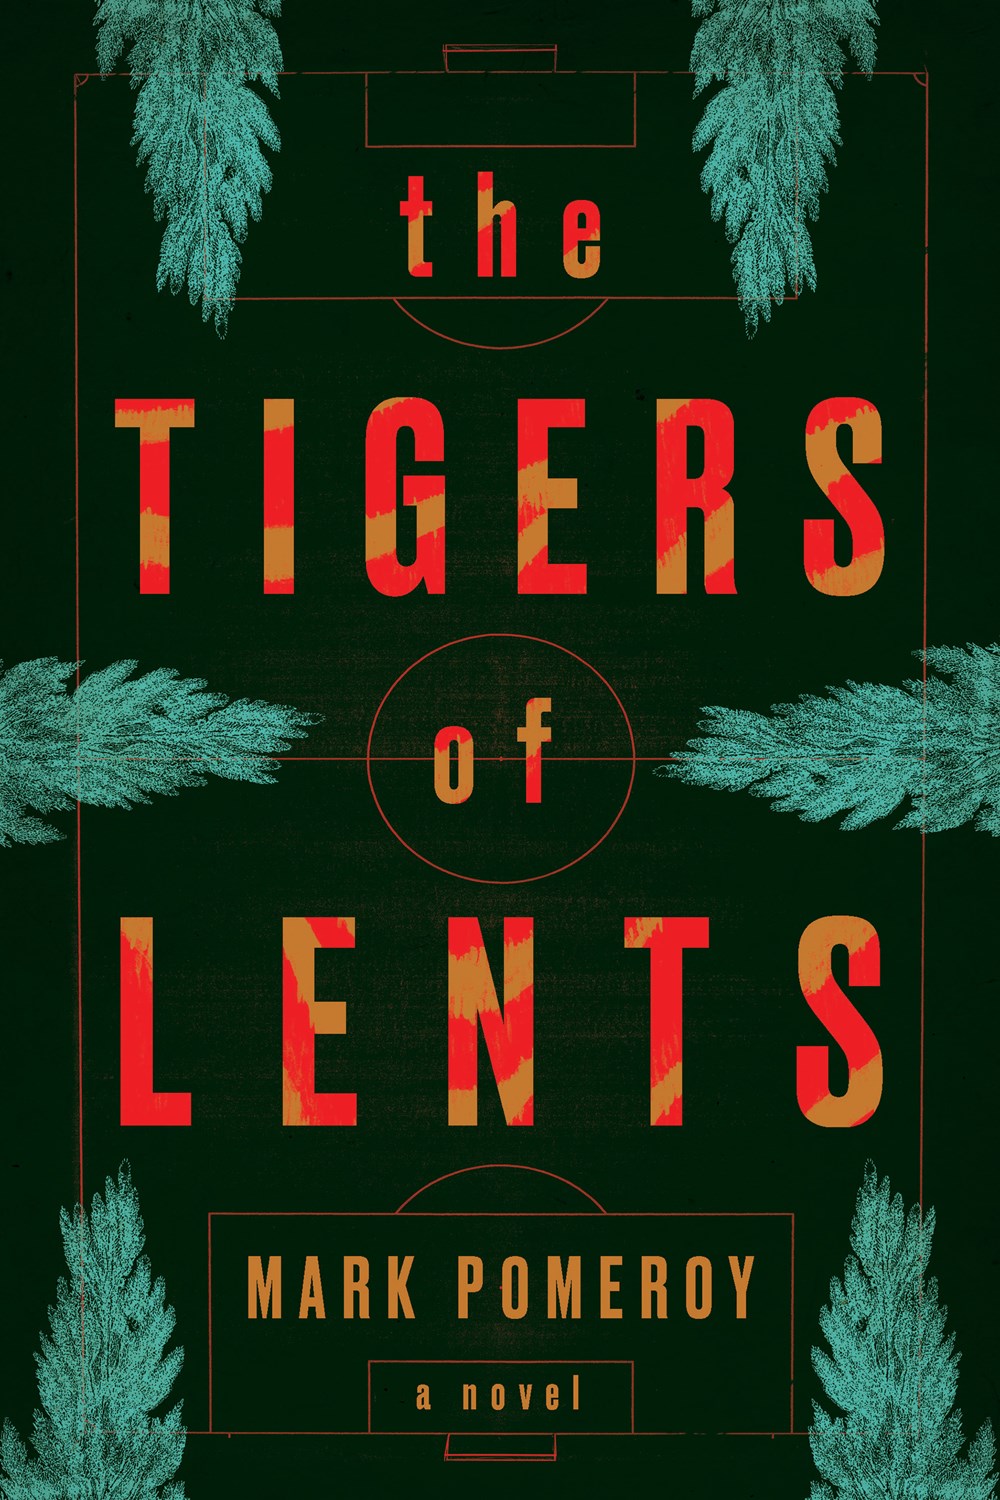 The-Tigers-Of-Lents-book-cover